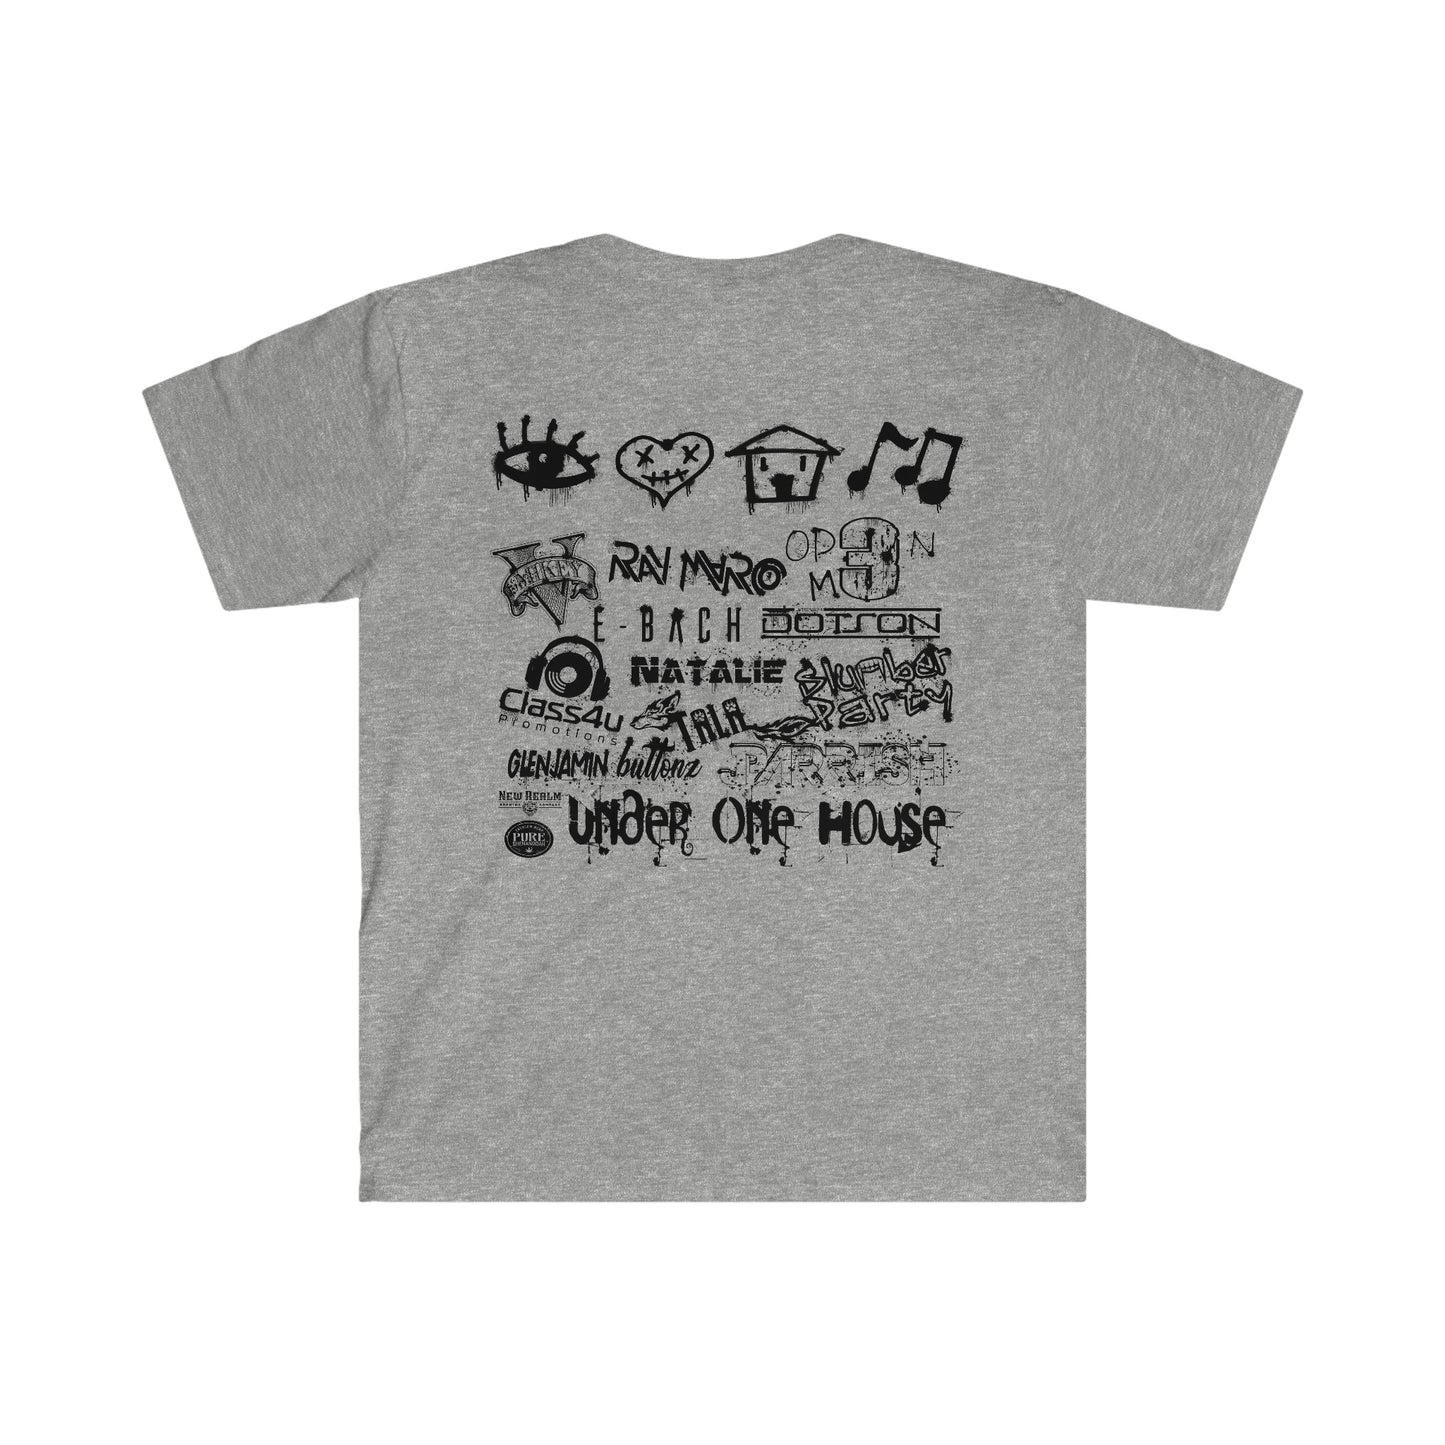 Official Under One House, Festival Tee (Dual Side Print)